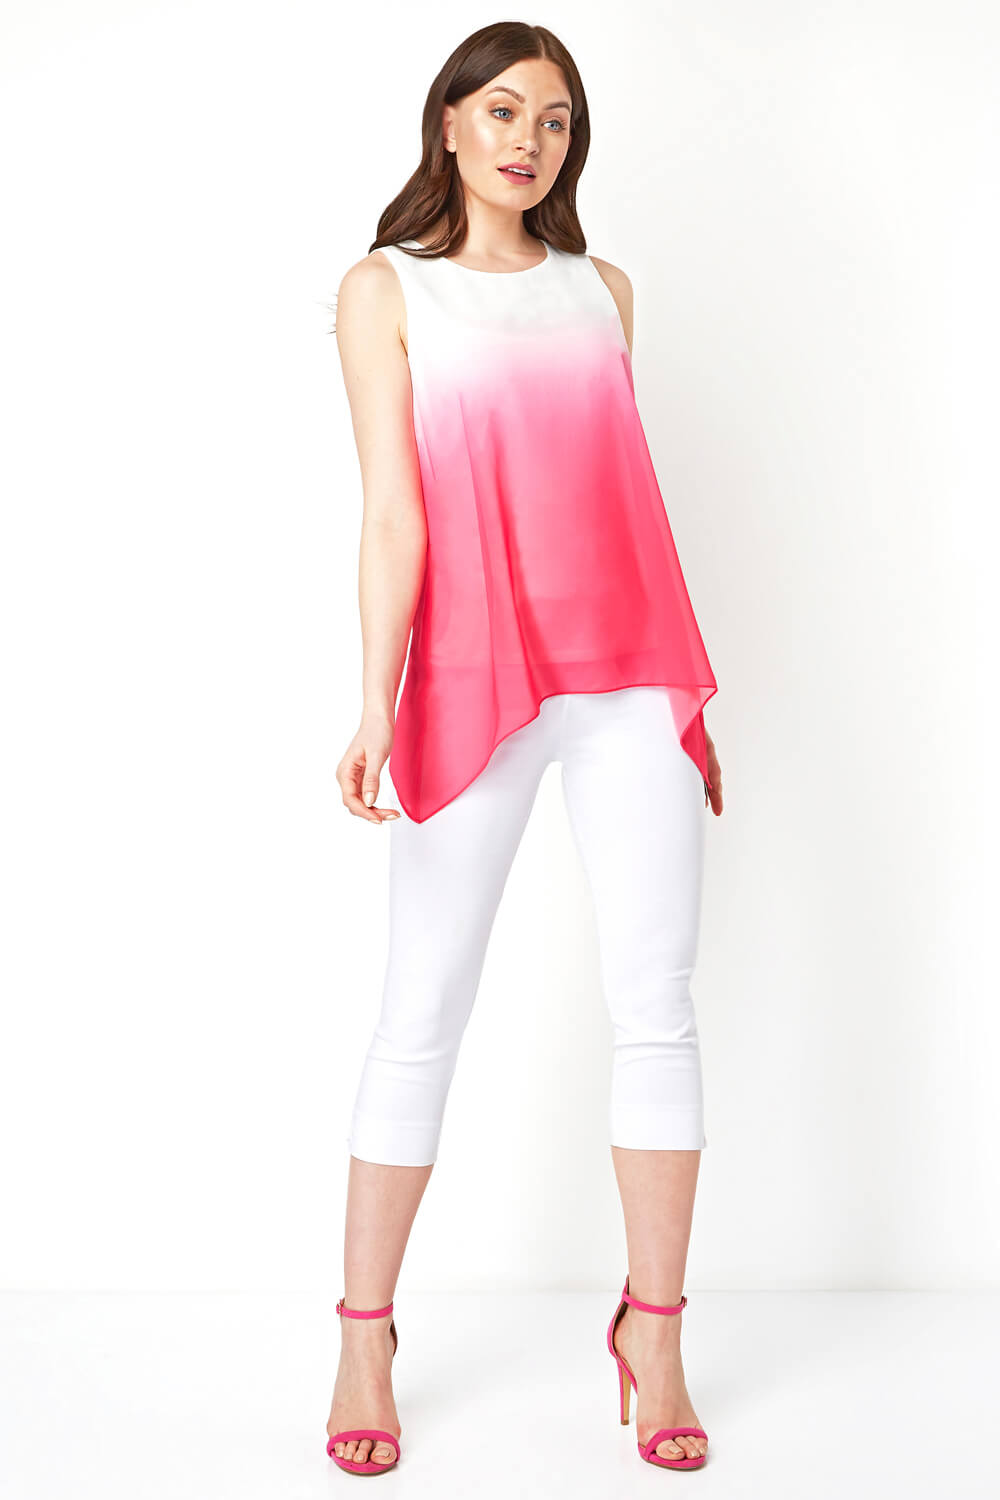 PINK Ombre Print Overlay Top, Image 2 of 8